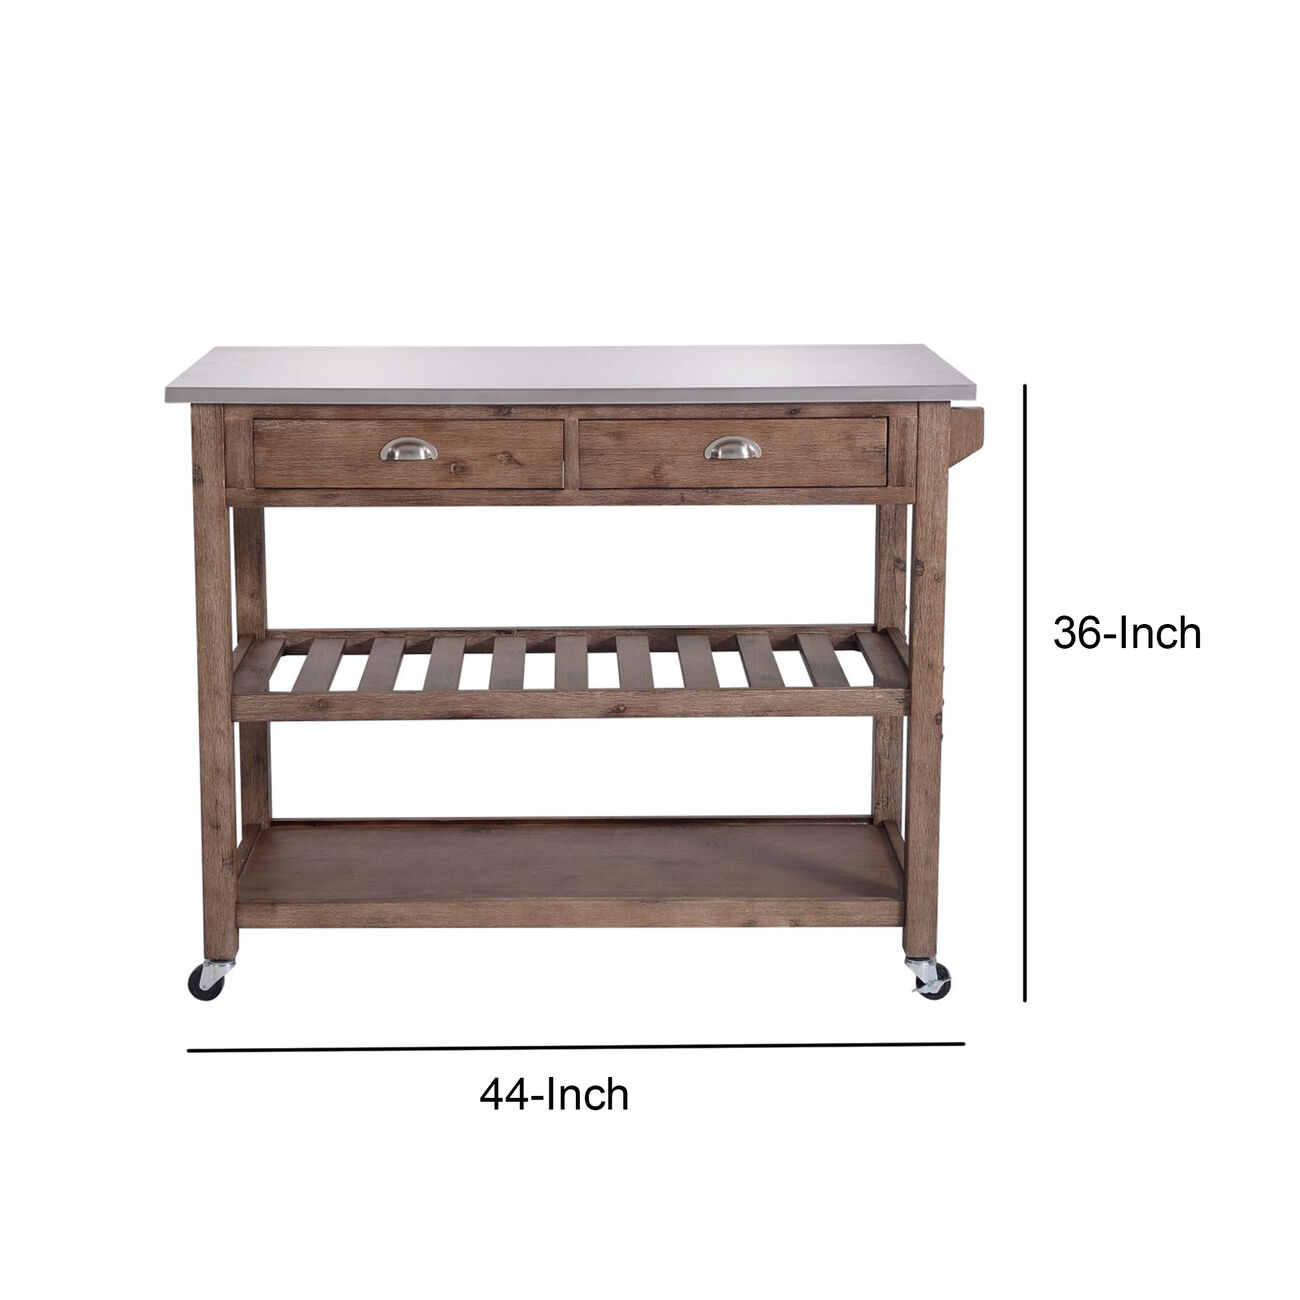 2 Drawers Wooden Kitchen Cart with Metal Top and Casters, Gray and Brown